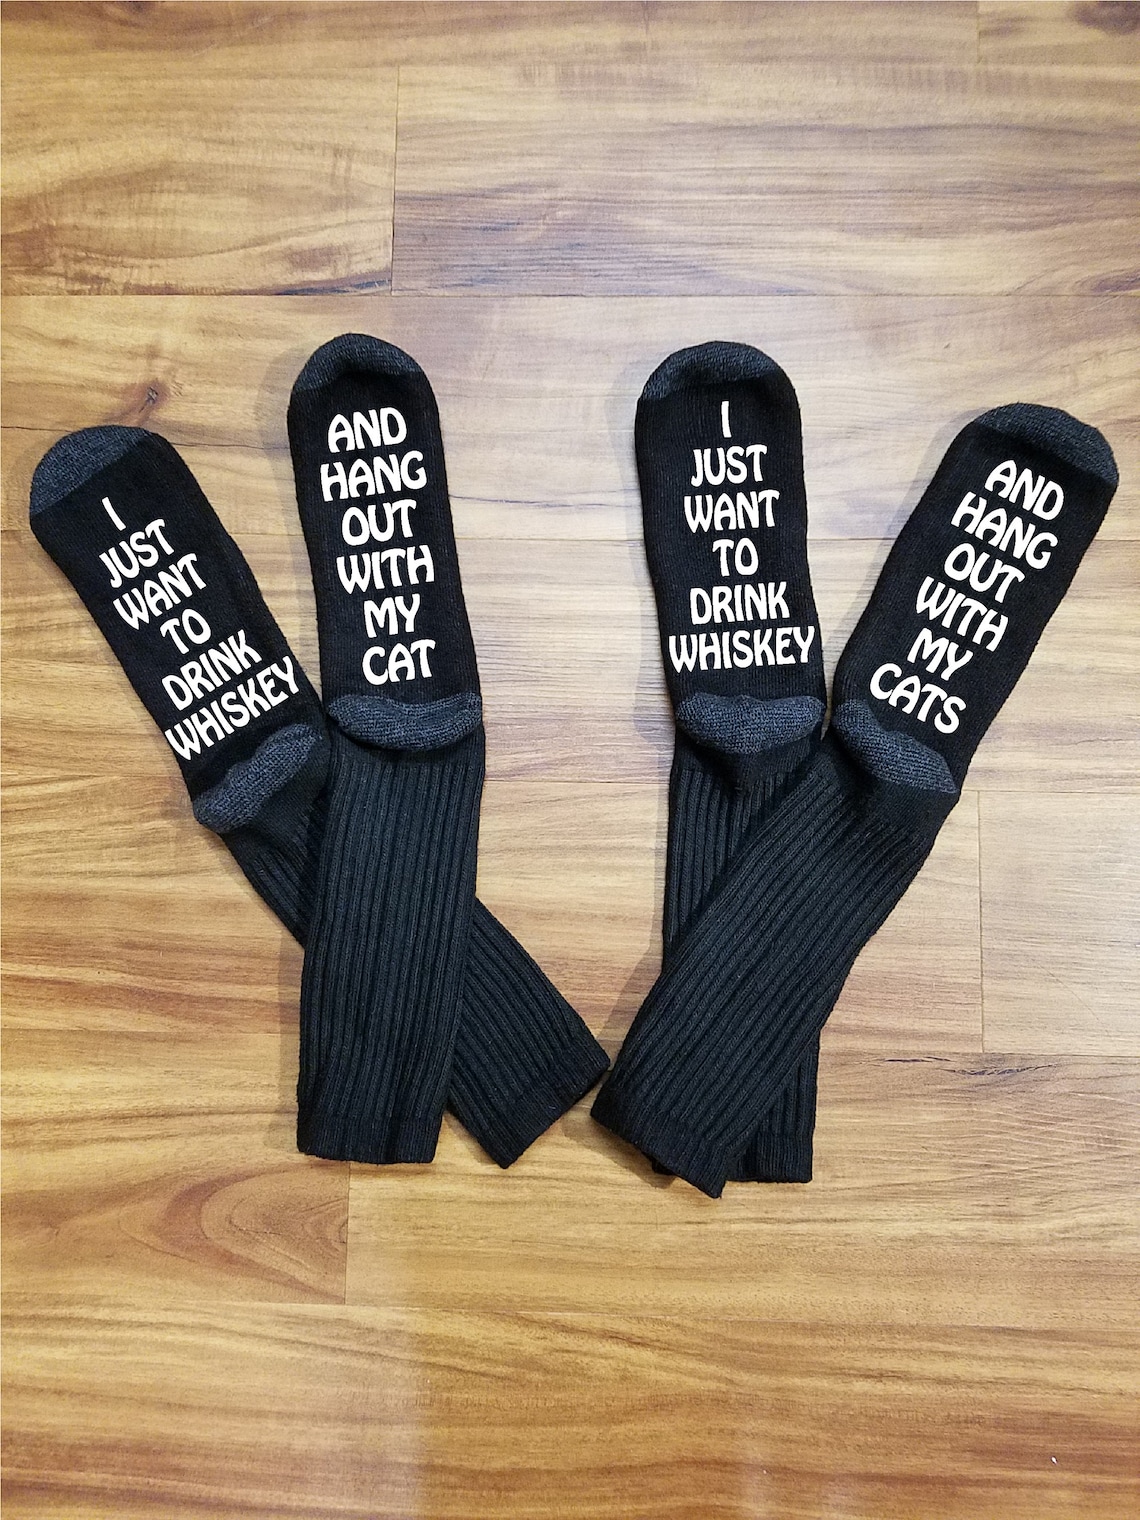 Beer Socks Drink Beer Socks Drink Beer and Hang Out With My - Etsy